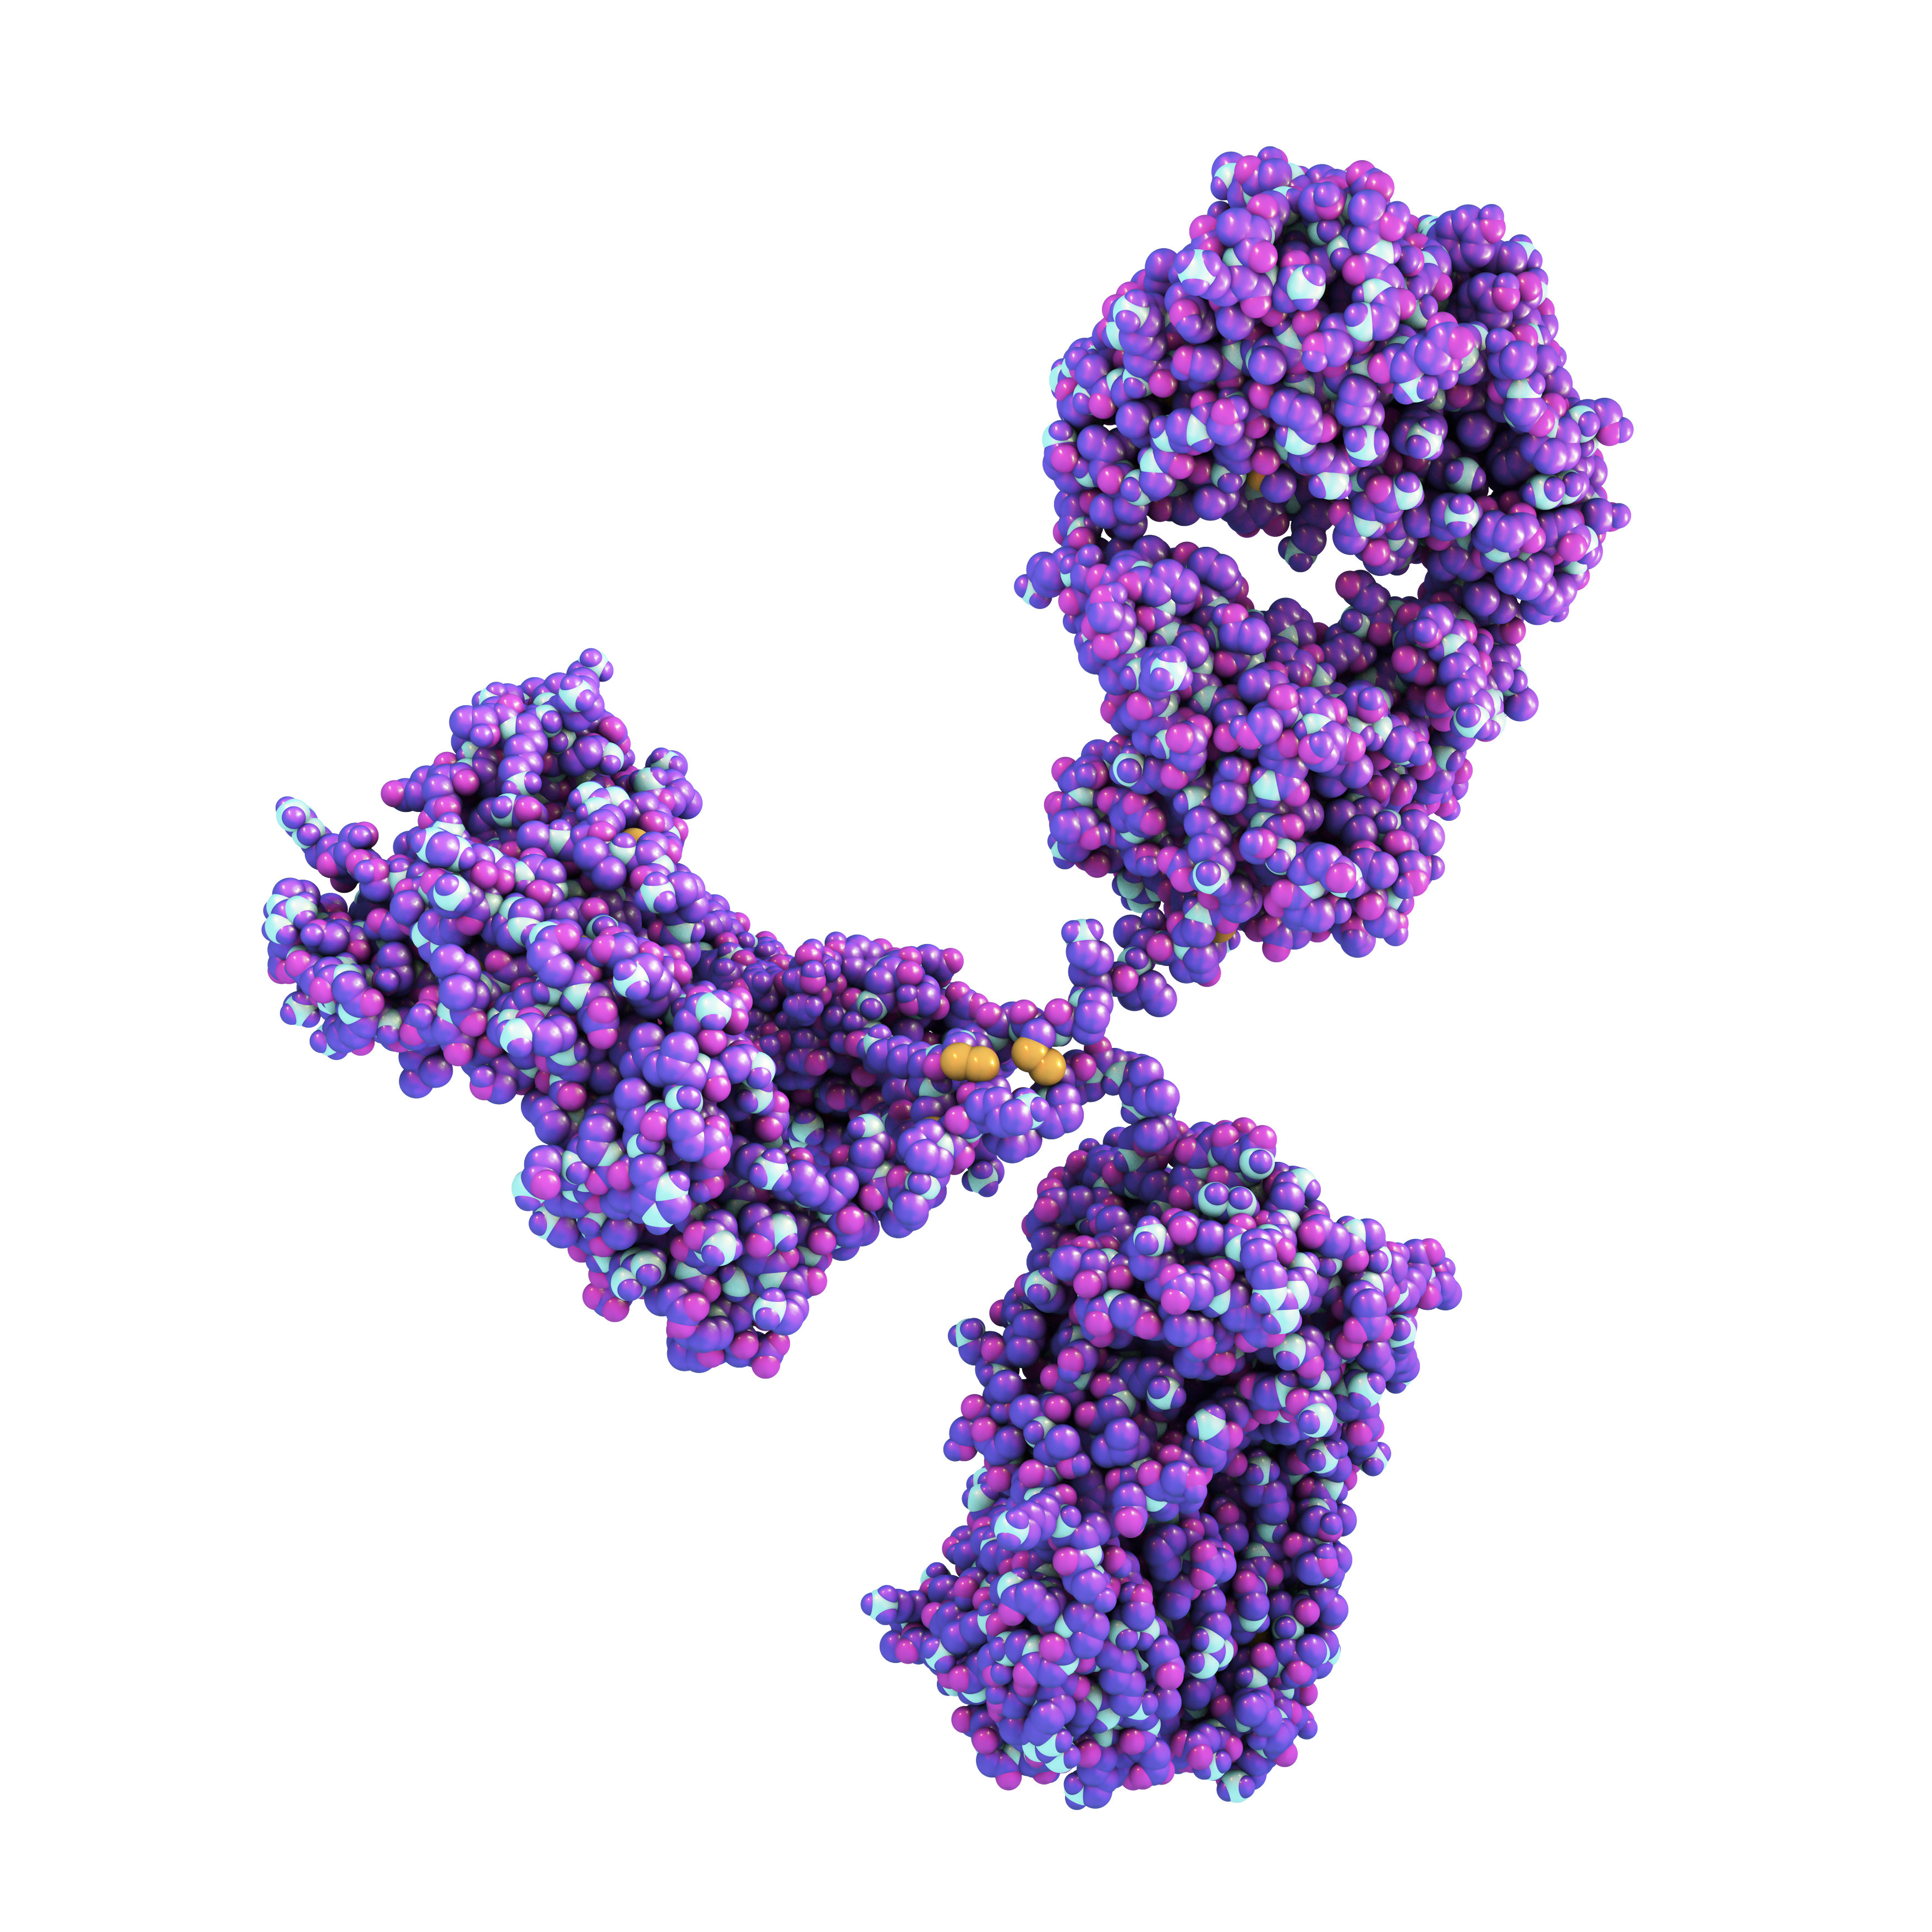 Rift Valley nucleoprotein IA4